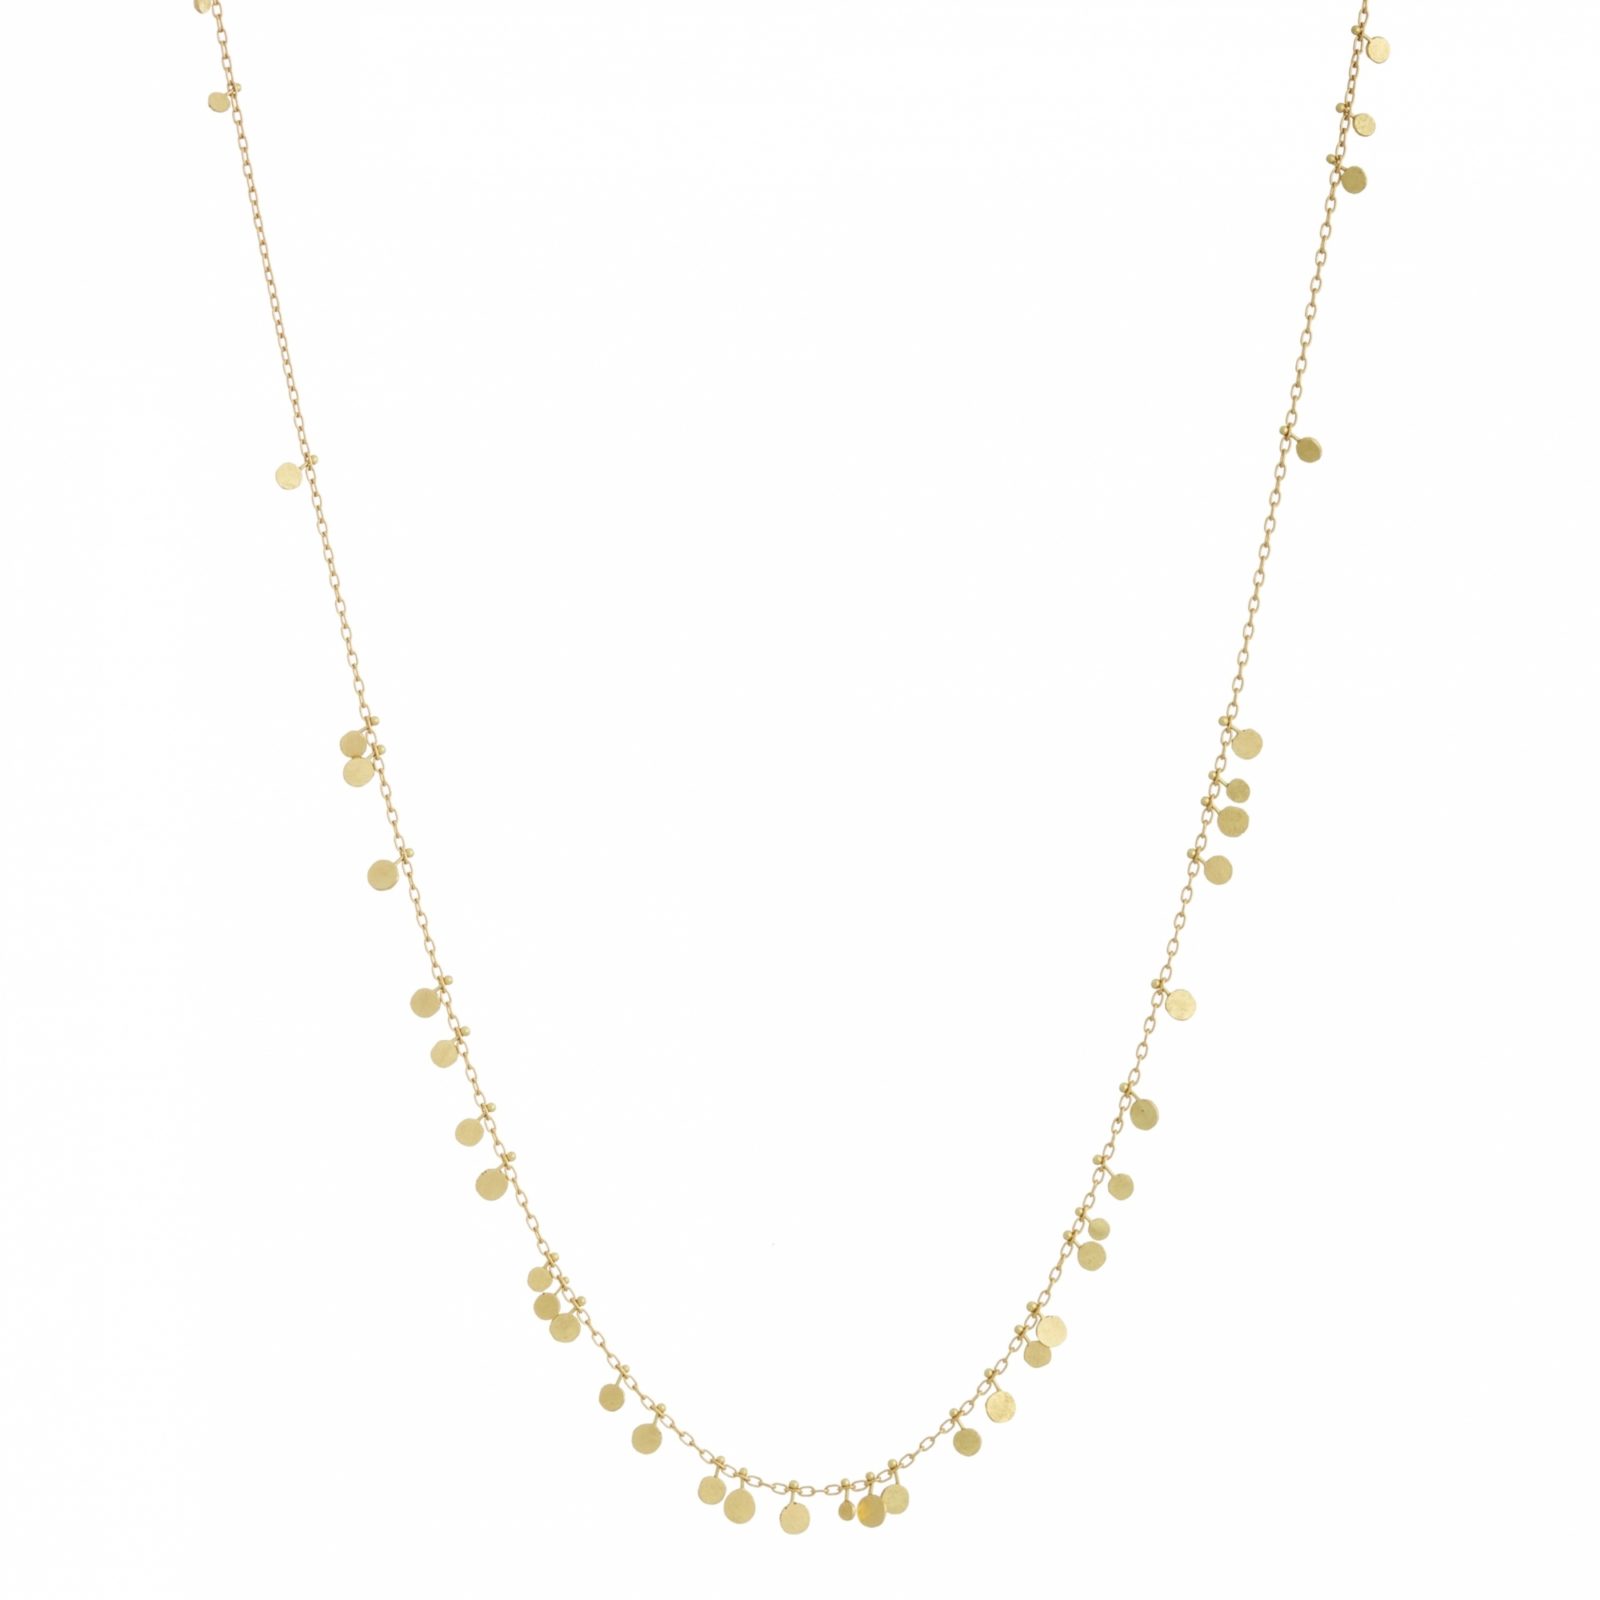 Sia Taylor DN32 Y Long Random Yellow Gold Dots Necklace WB